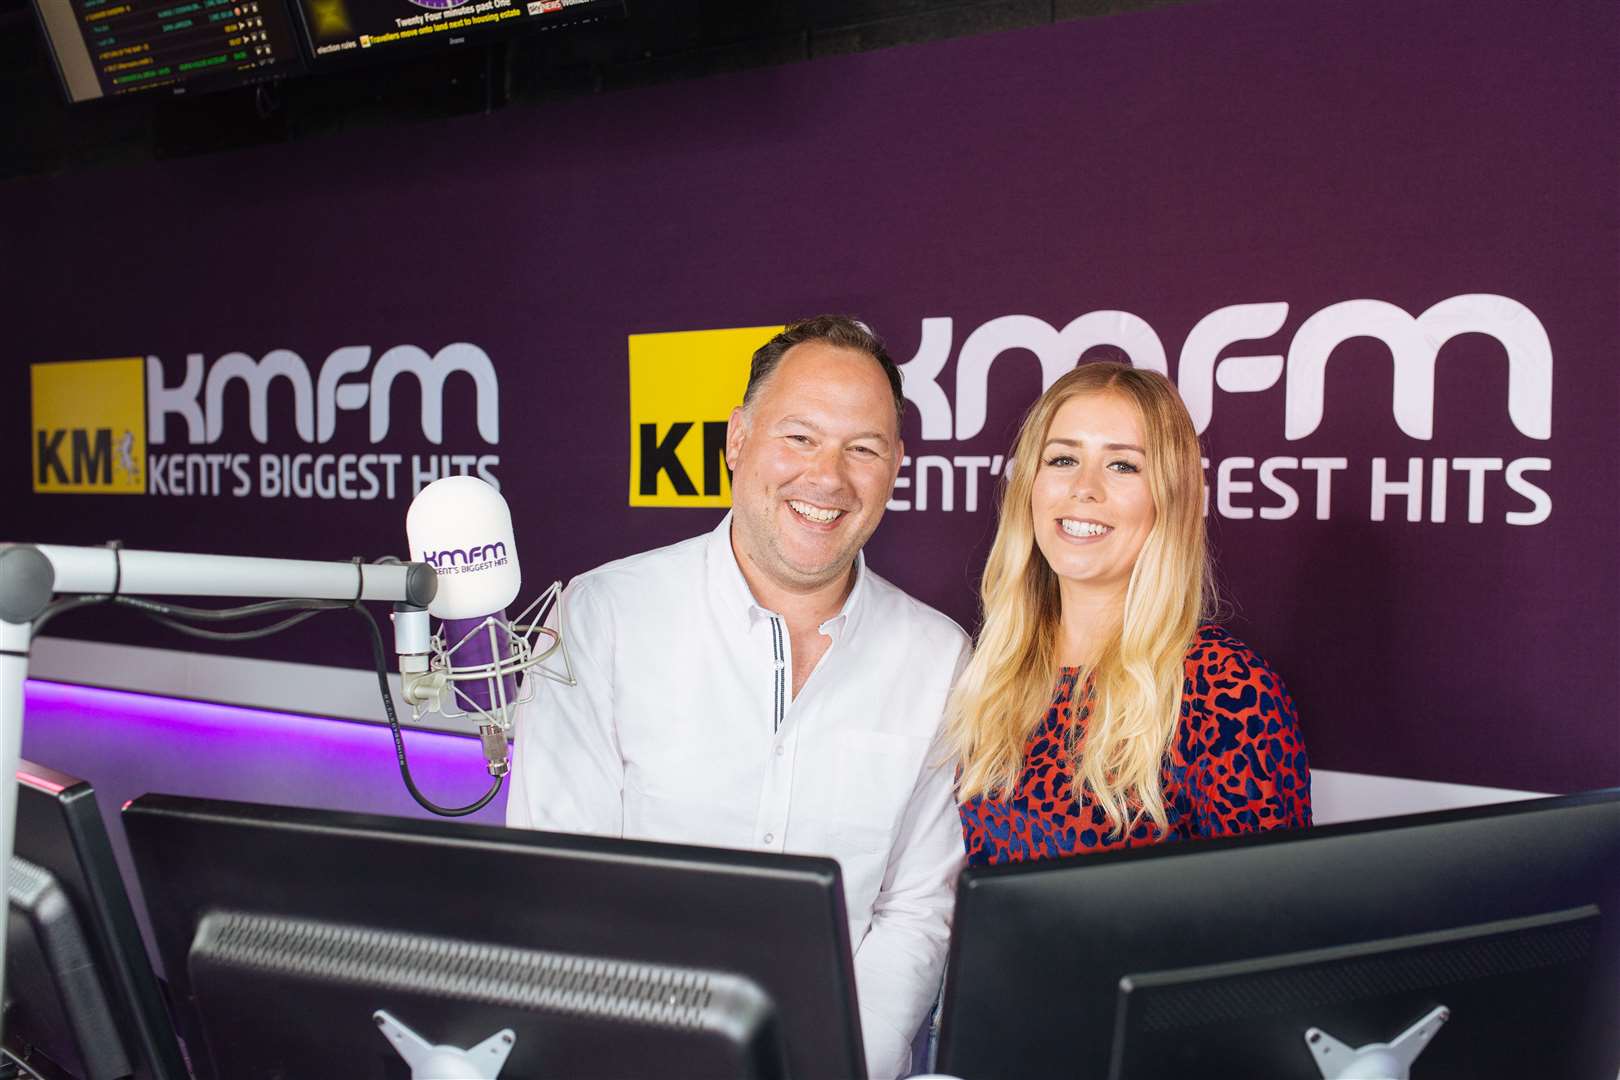 126,000 people are waking up with kmfm Breakfast with Garry and Laura